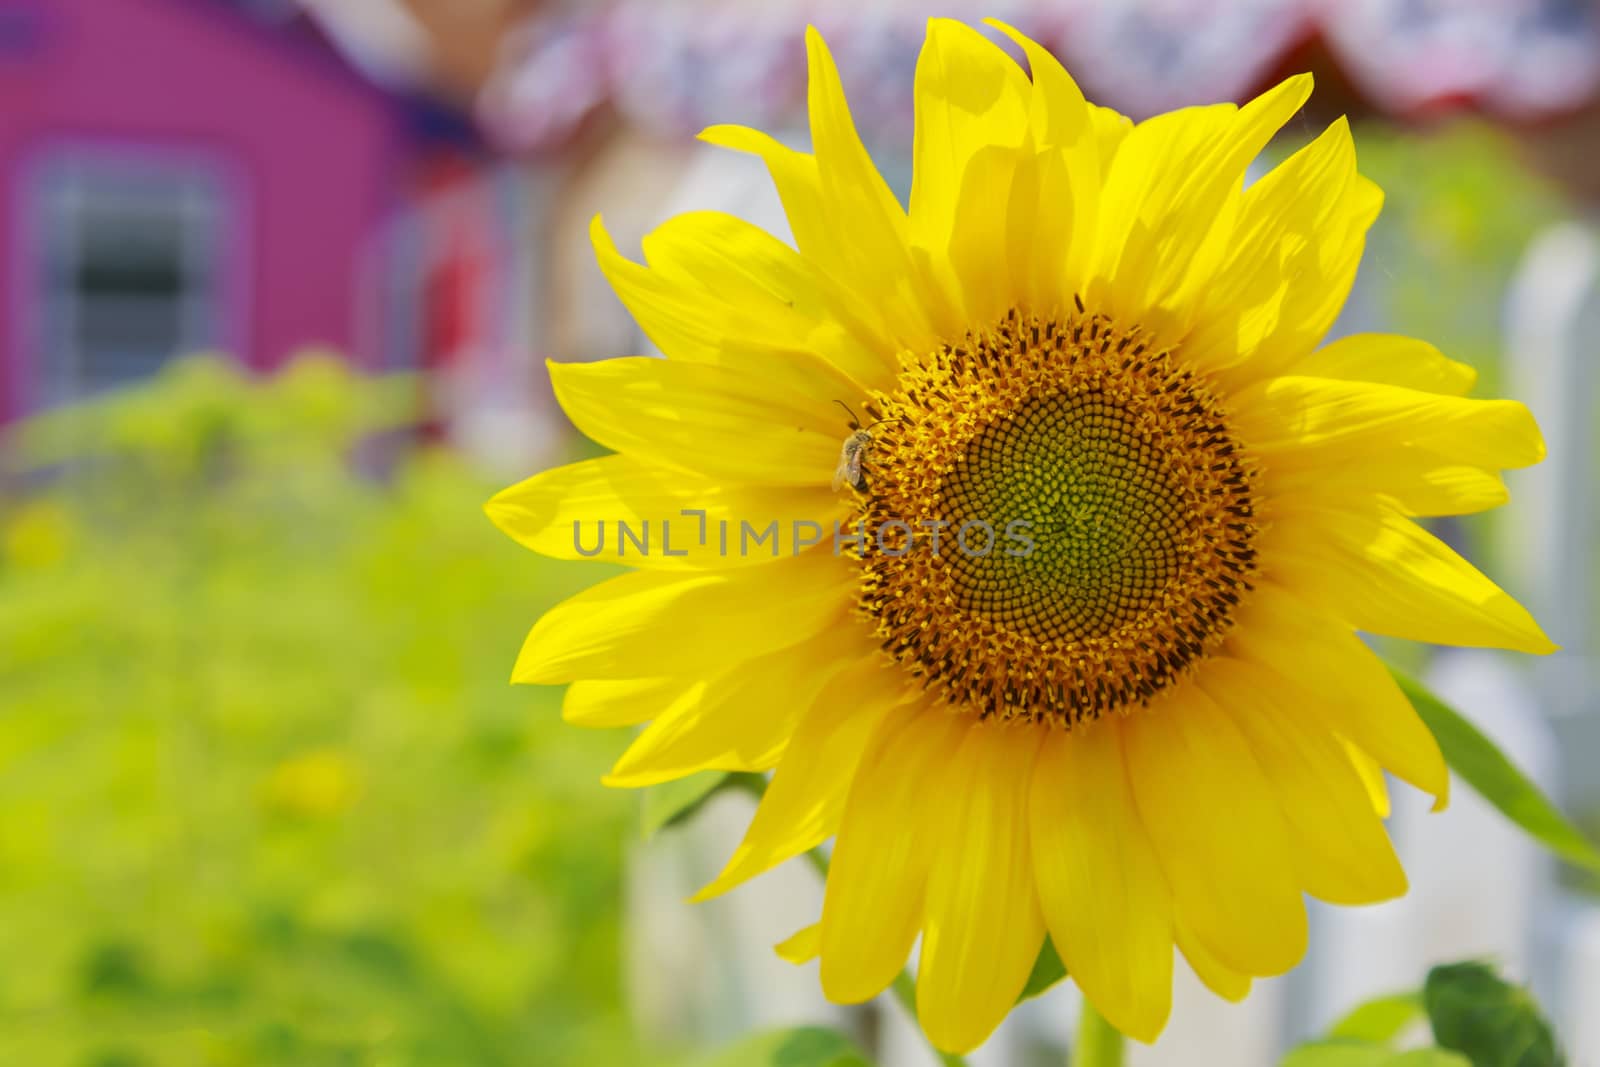 Bright Sunflower by fallesenphotography